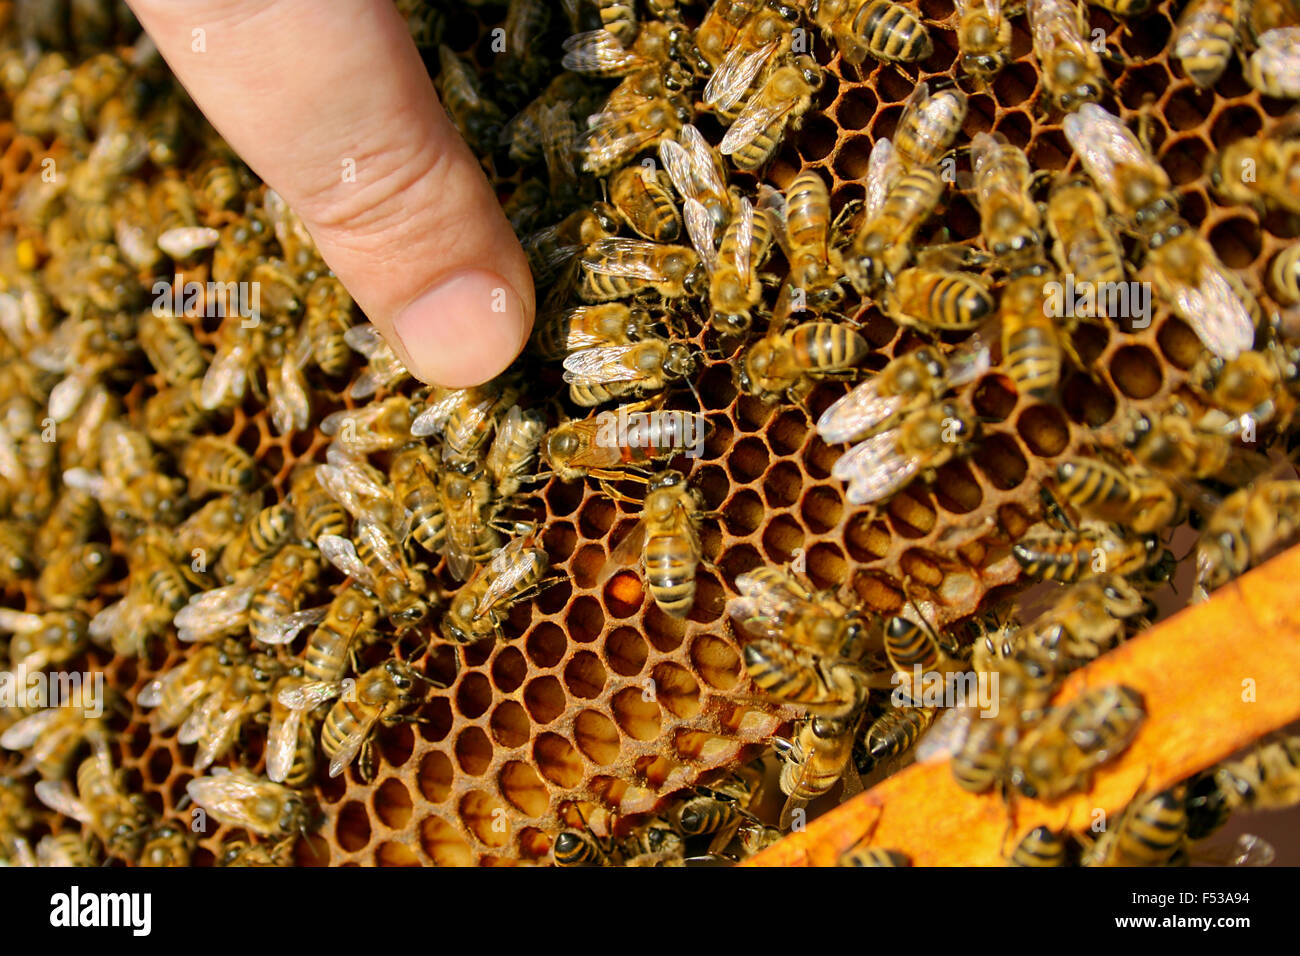 Busy bees, close up view of the working bees on honeycomb. Bees close up showing some animals with the queen bee in the middle a Stock Photo